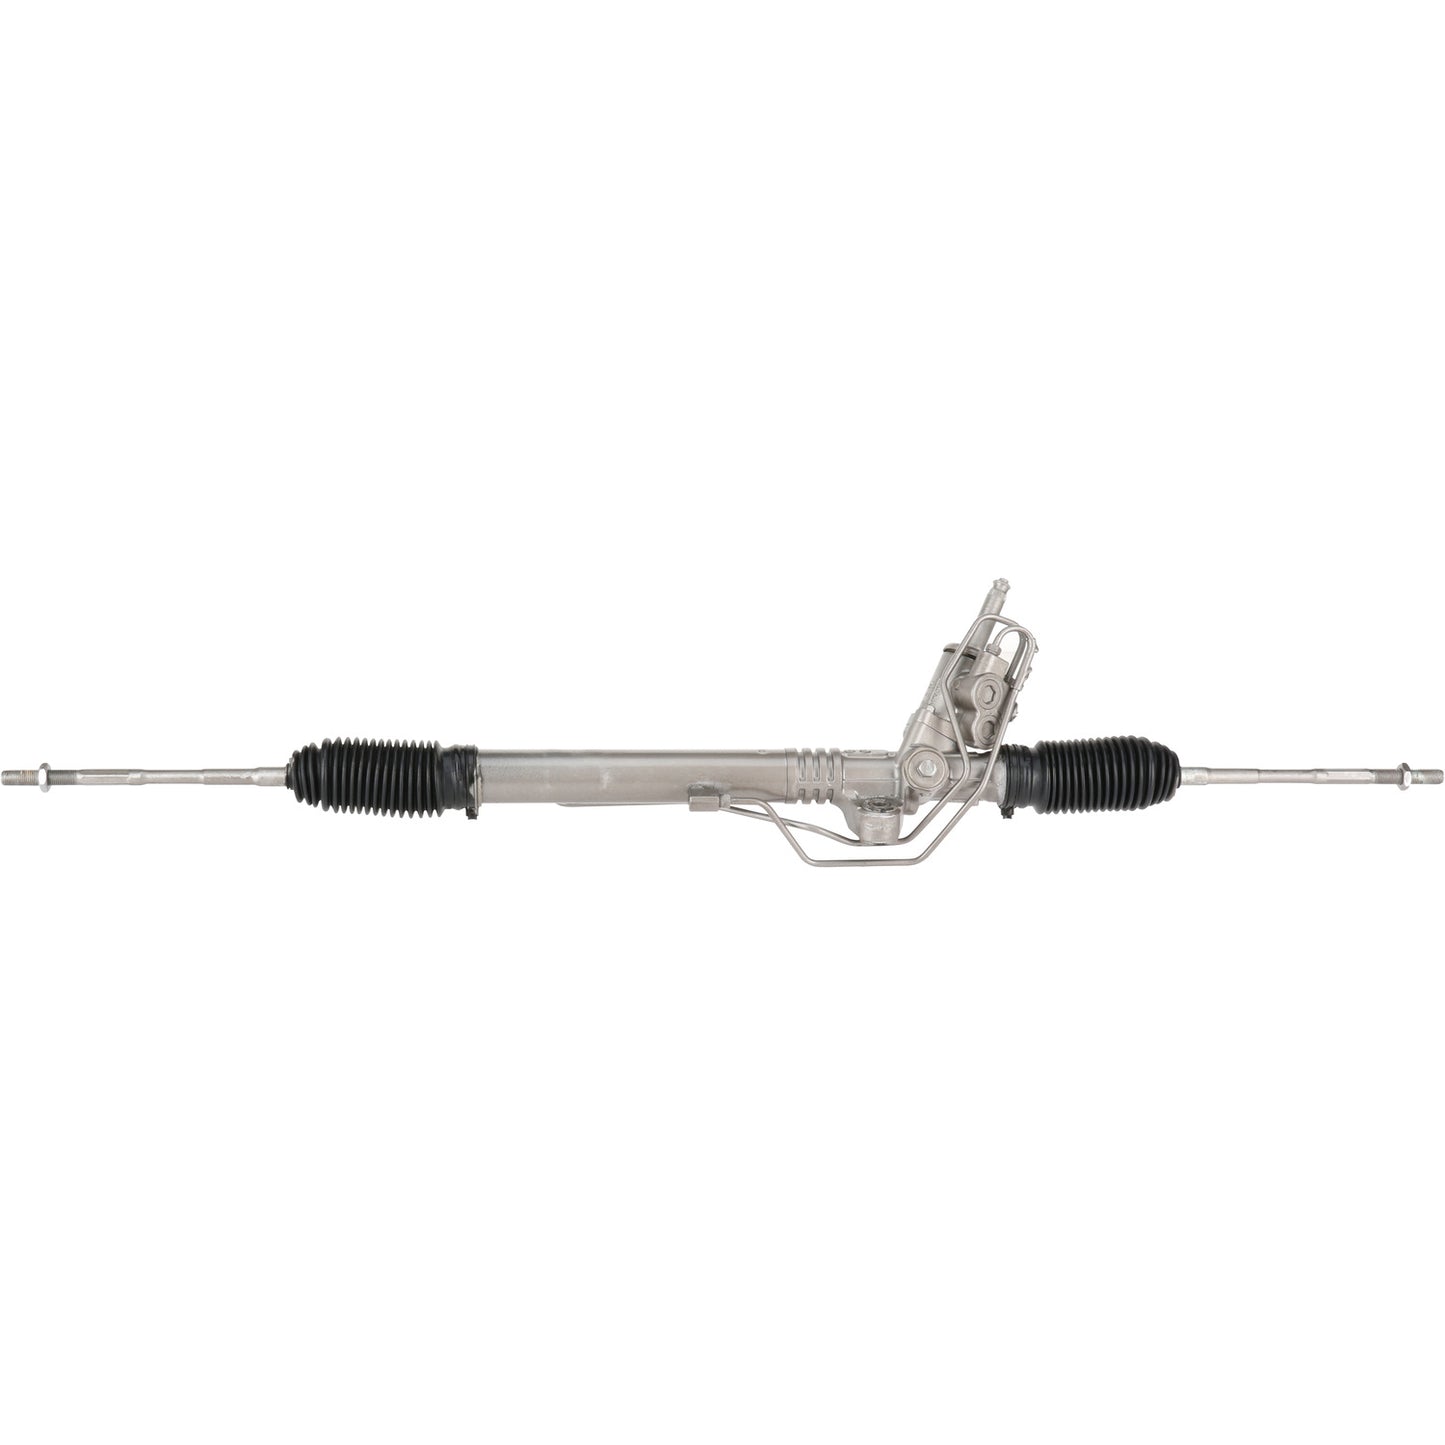 Rack and Pinion Assembly - MAVAL - Hydraulic Power - Remanufactured - 93363M